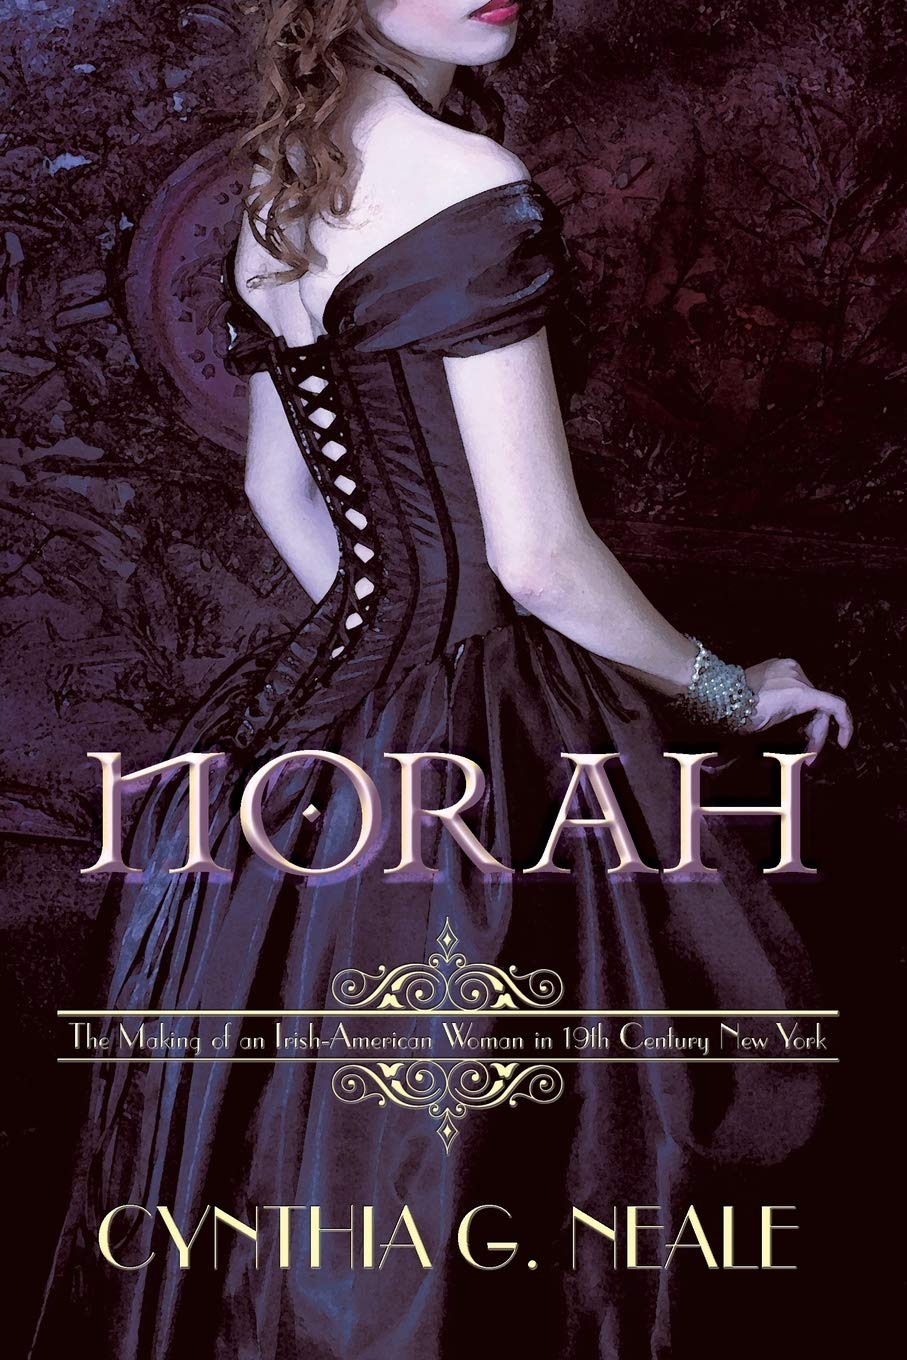 Norah, The Making of an Irish-American Woman in 19th-Century New York by Cynthia G. Neale